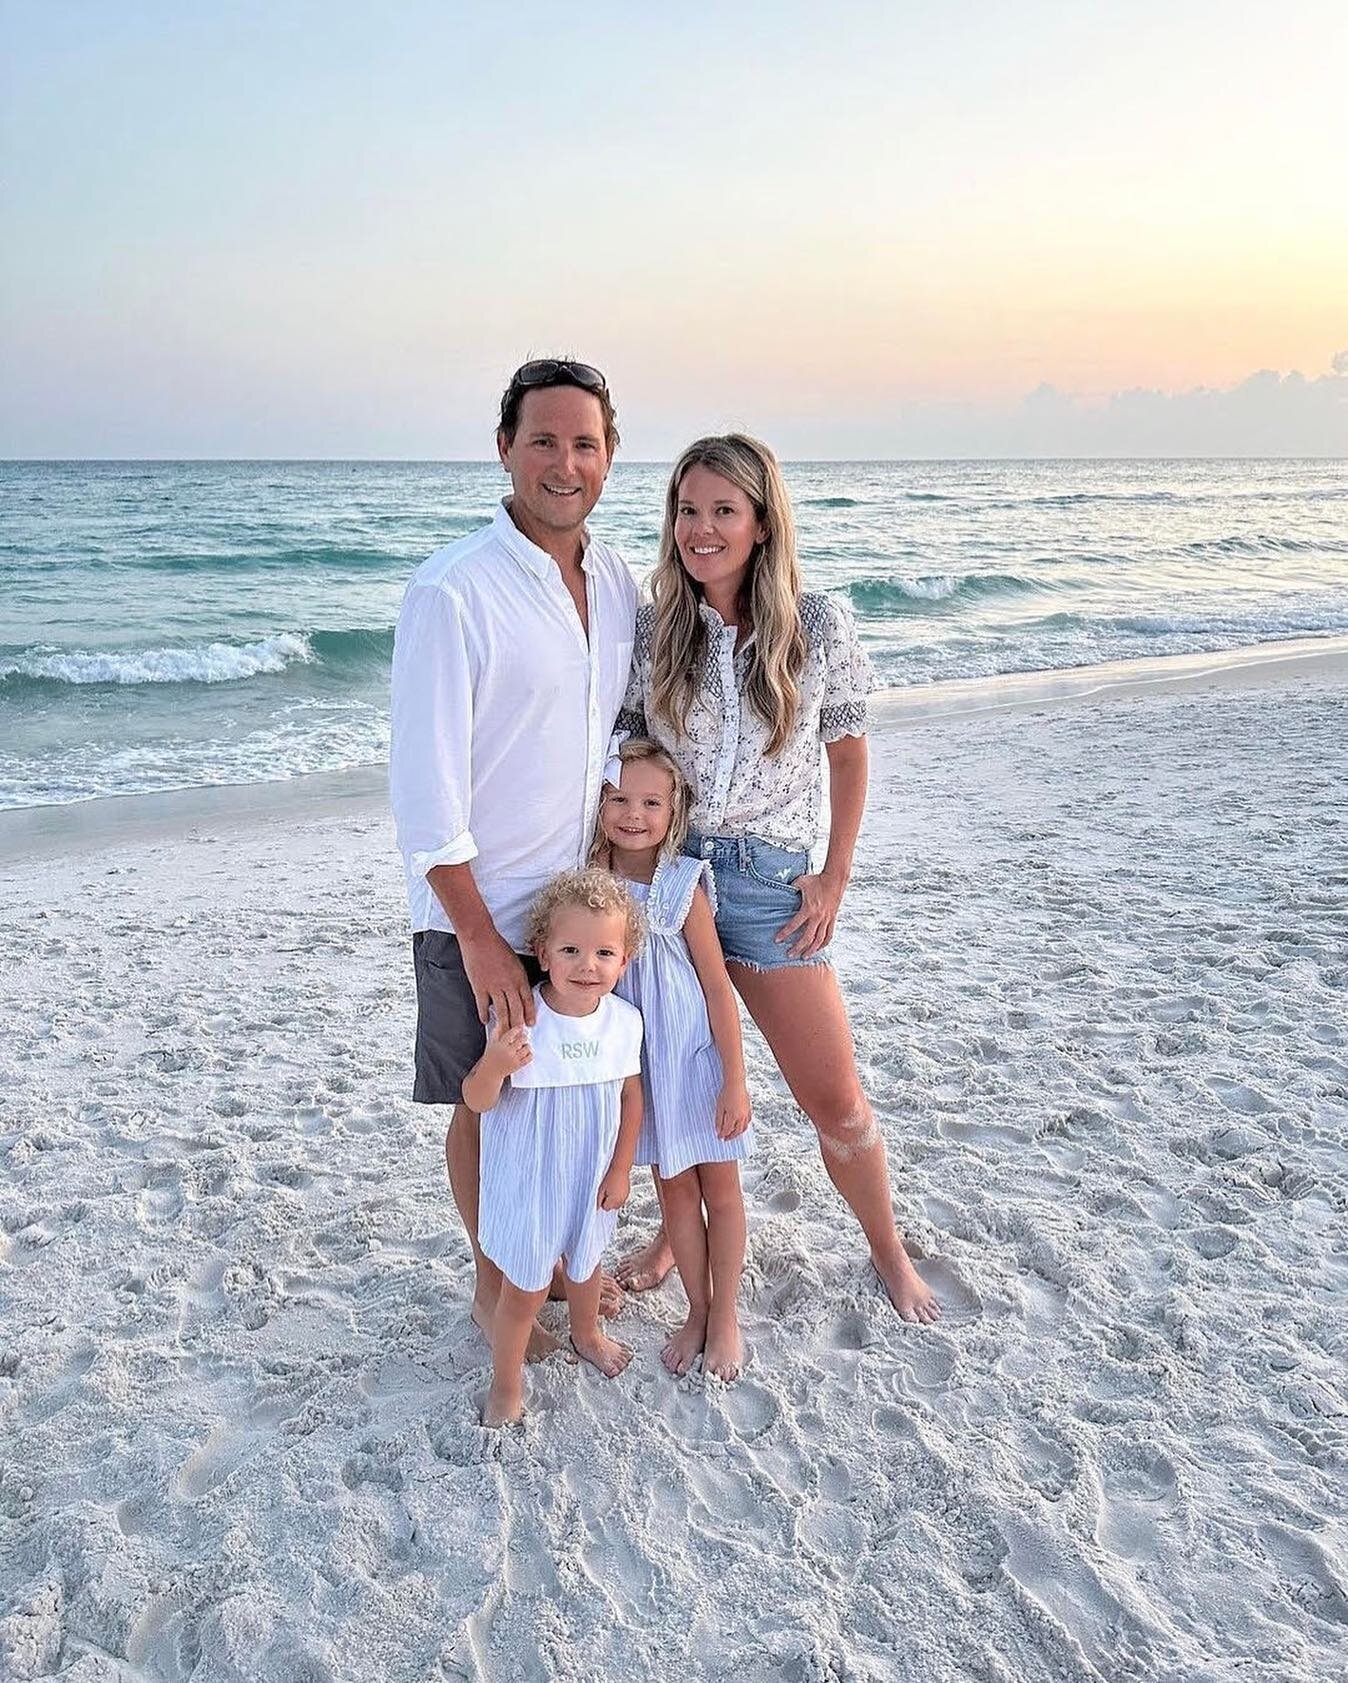 My earliest memories on 30A are playing in the sand with my dad. Now I get to call this place 'home' and make memories with children of my own.

You only get one life - go after what you want and live the life you love!

Happy Father's Day to all of 